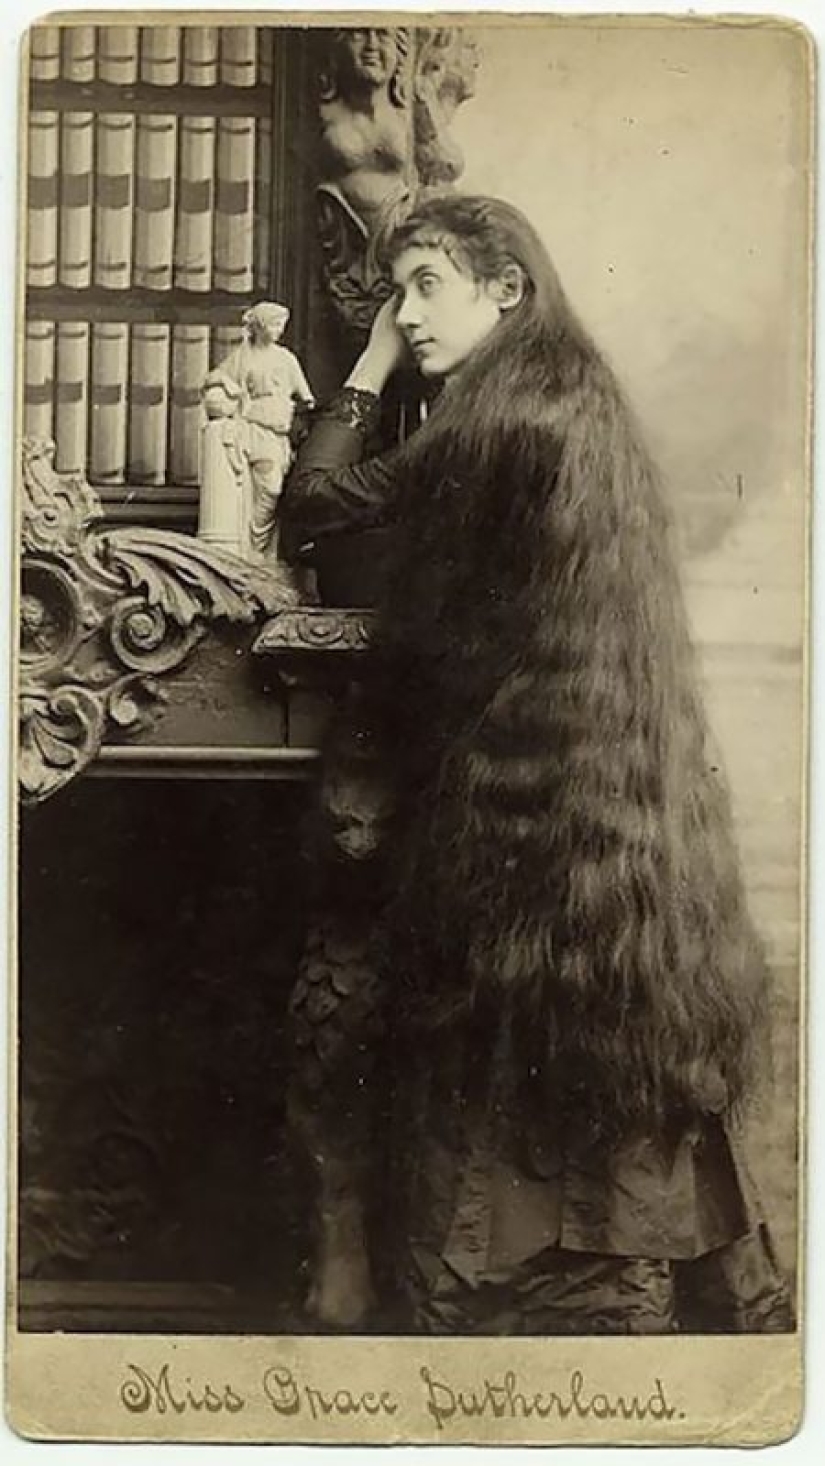 Hair lifetime: beauties of the Victorian era, which never had a haircut